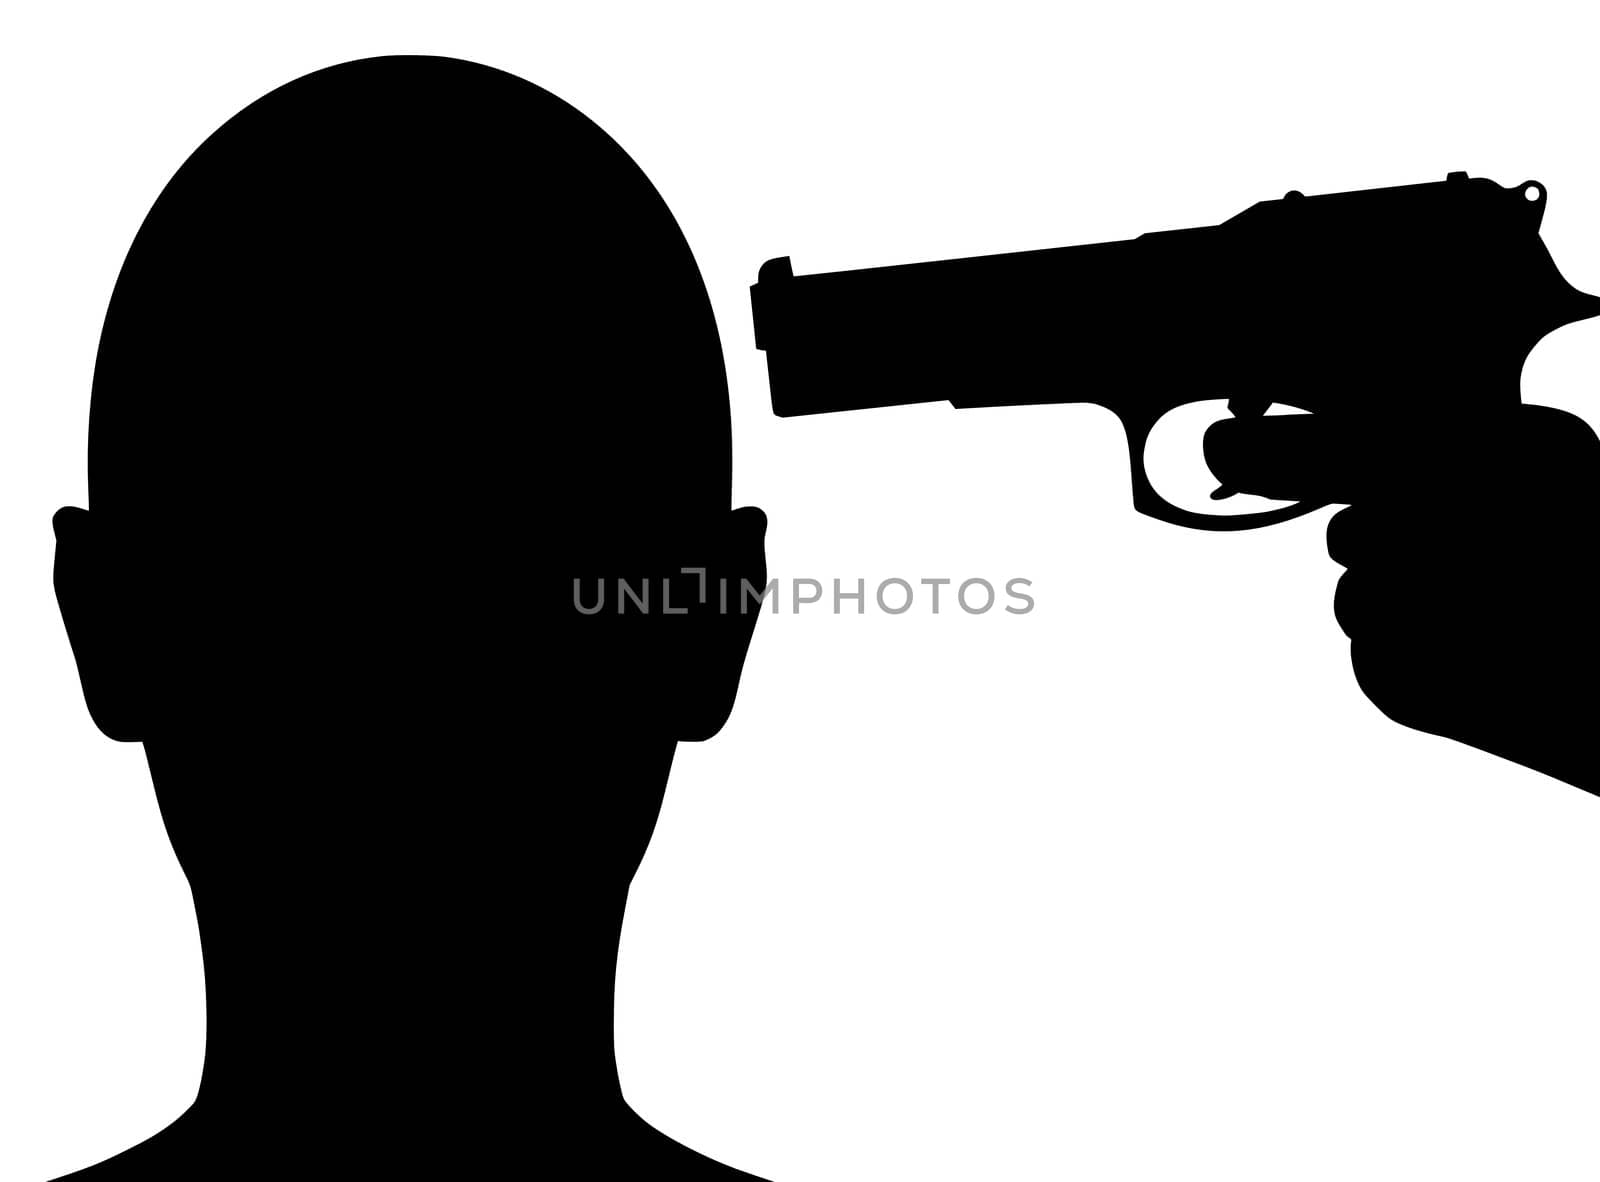 Illustration of a person with a gun pointing at their head